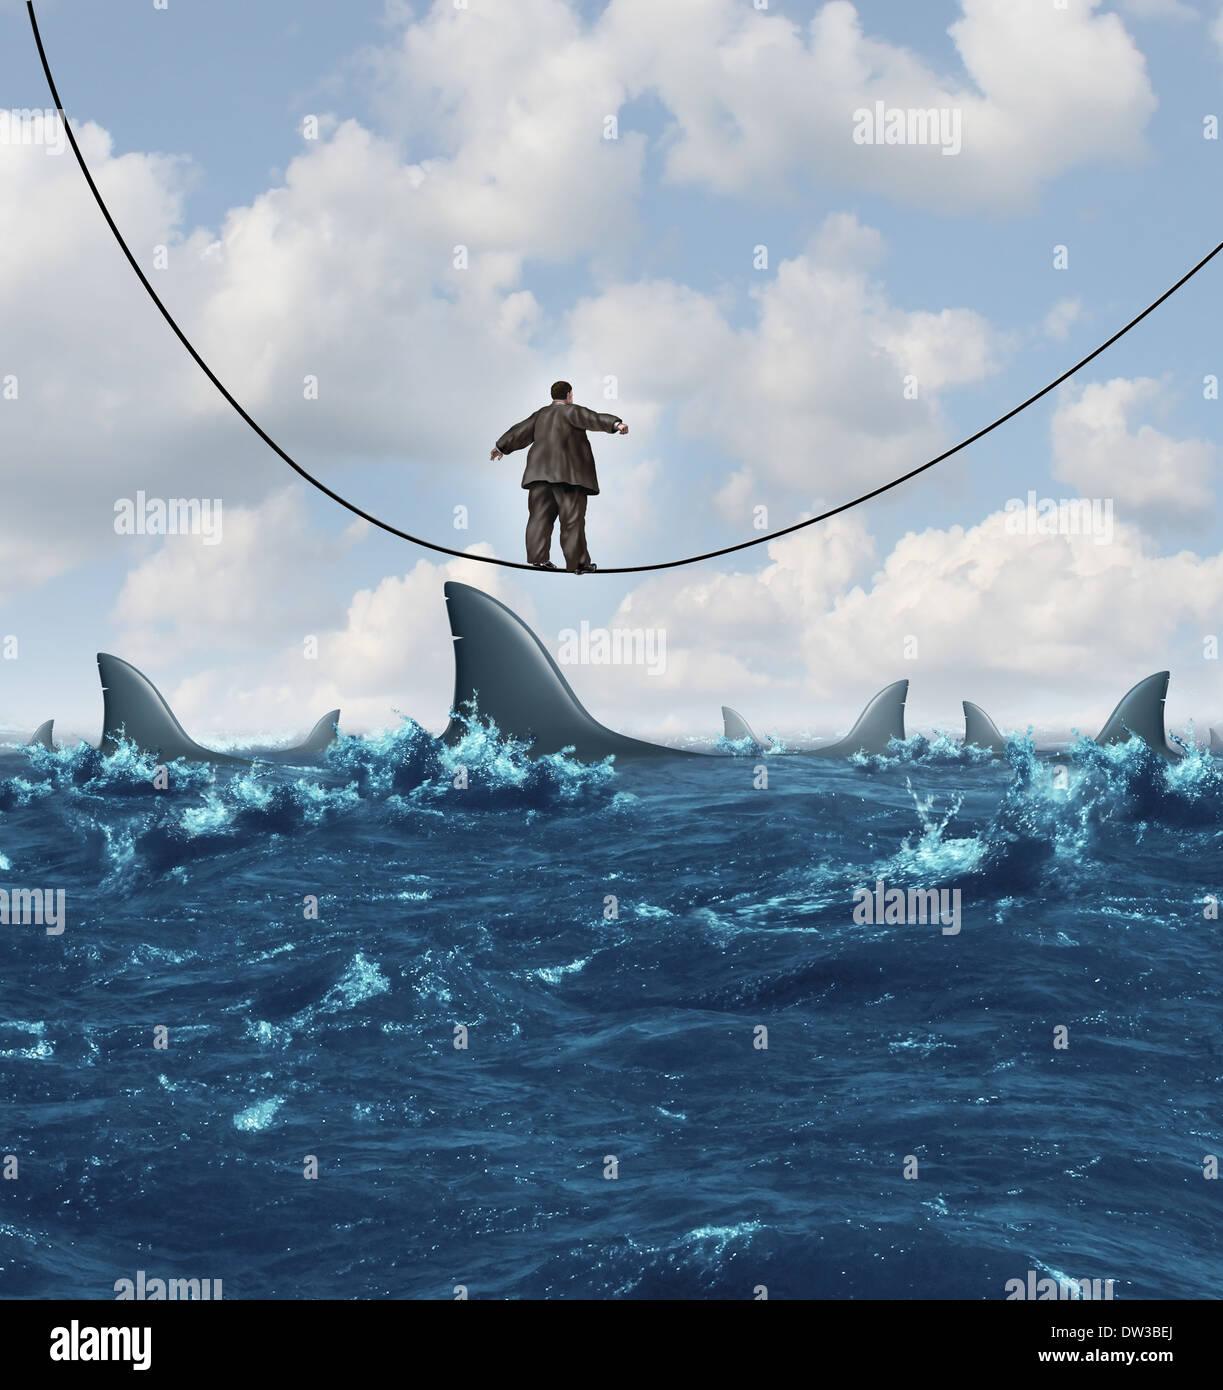 Vulnerable business concept as an overweight unfit businessman walking on a sinking highwire with dangerouse sharks ready to attack as a metaphor for financial vulnerability in a competitive economic environment. Stock Photo